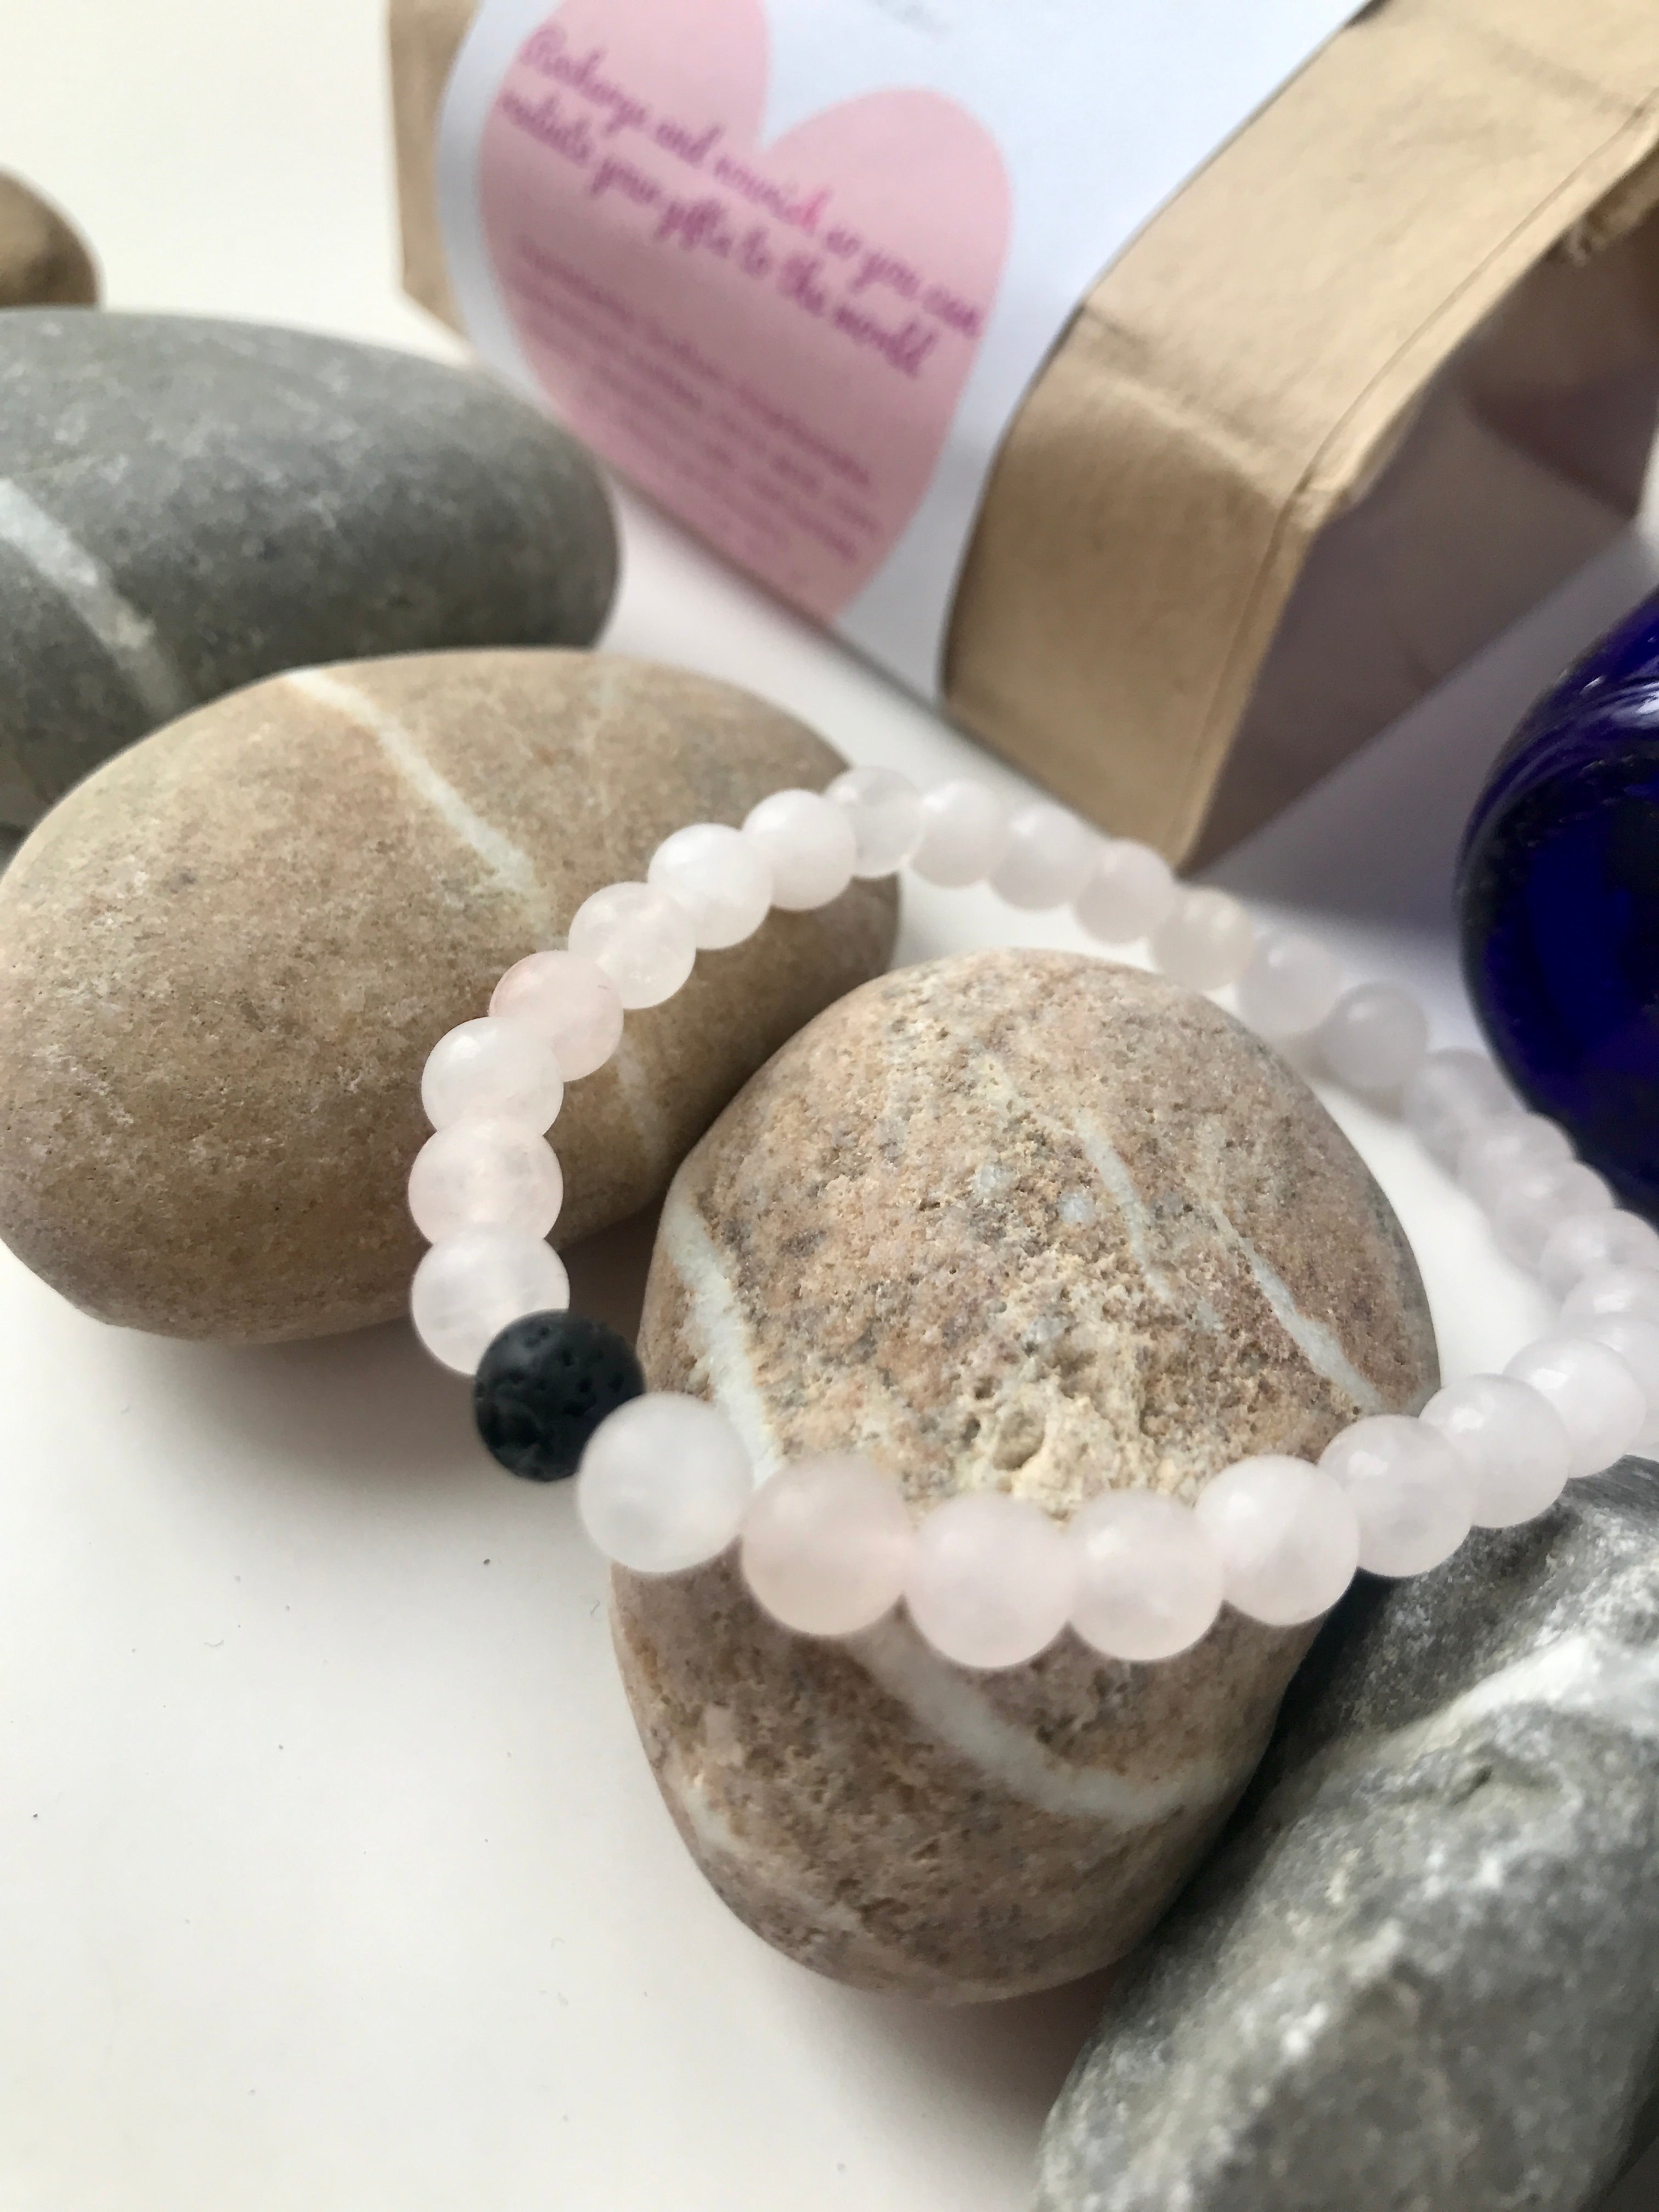 Rose Quartz beaded bracelet hand made in Calgary Alberta by Stresscase.  Rose Quartz is the crystal that promotes and inspires self-love.